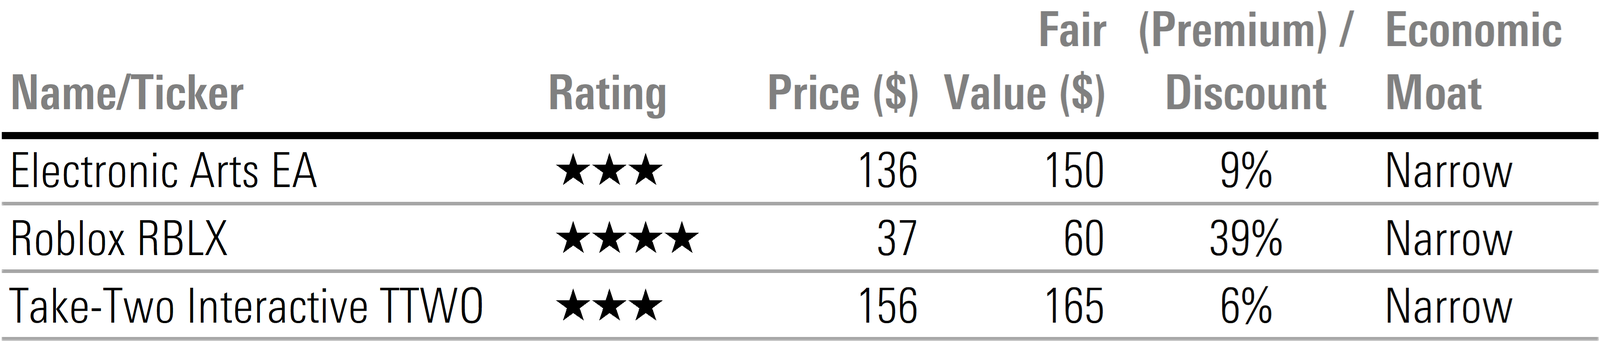 Table displaying star rating, price, fair value, premium or discount, and economic moat rating for stocks under Morningstar coverage in the electronic gaming sector.